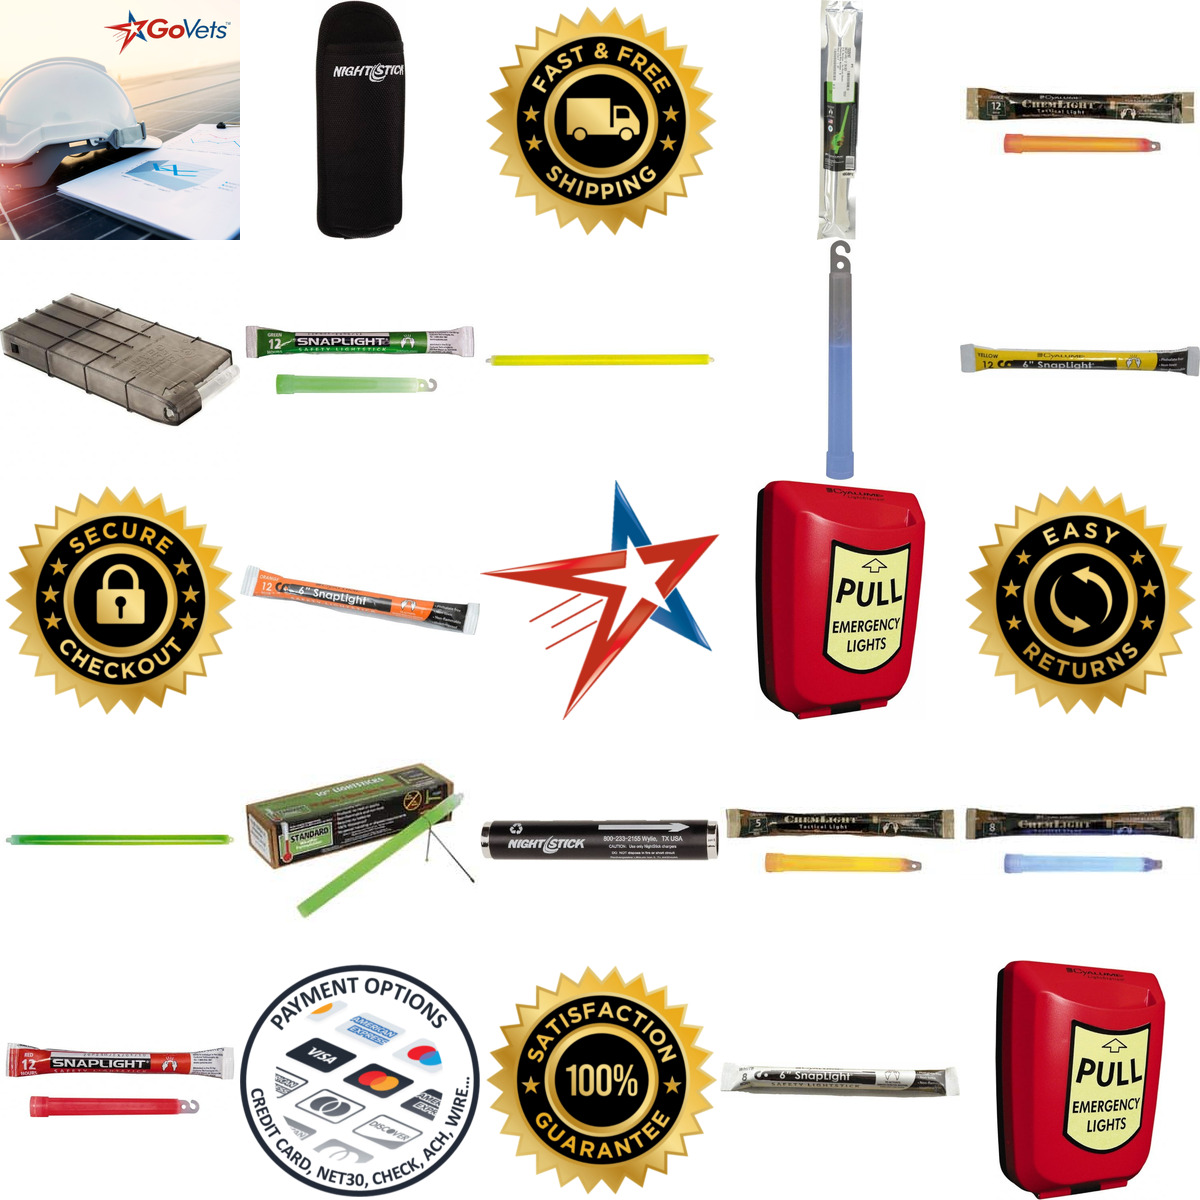 A selection of Lightsticks and Accessories products on GoVets